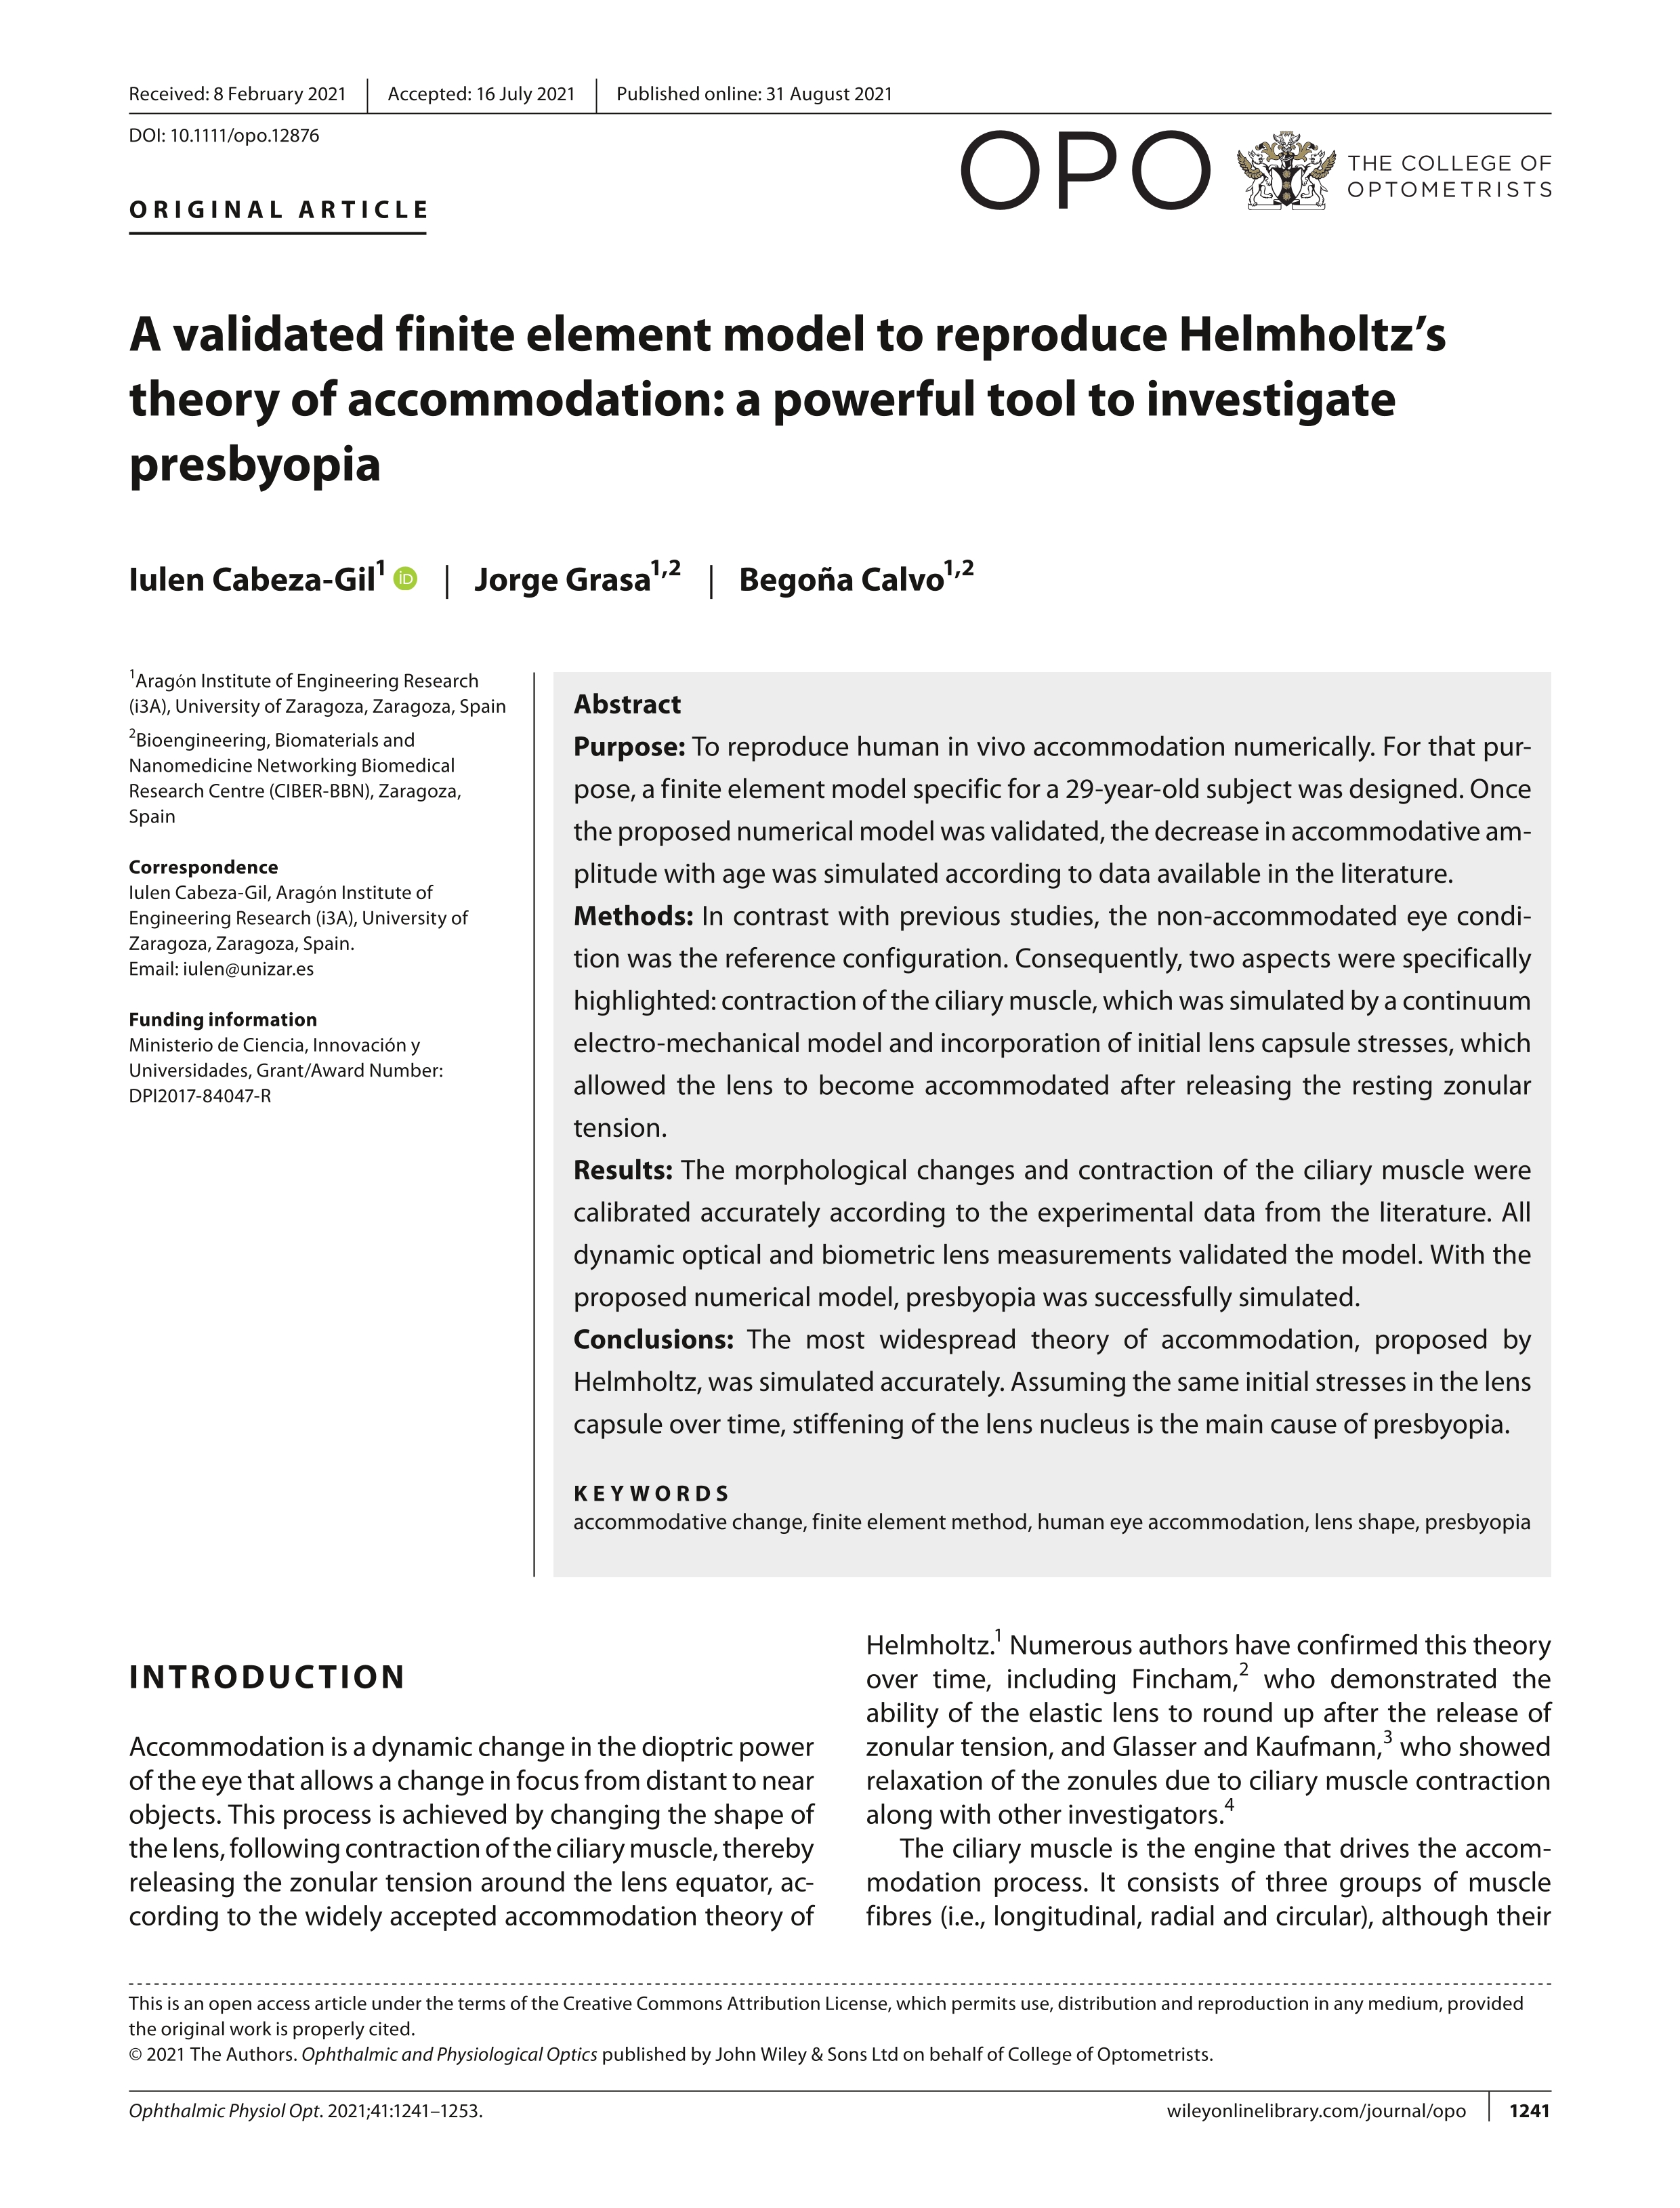 A validated finite element model to reproduce Helmholtz’s theory of accommodation: a powerful tool to investigate presbyopia